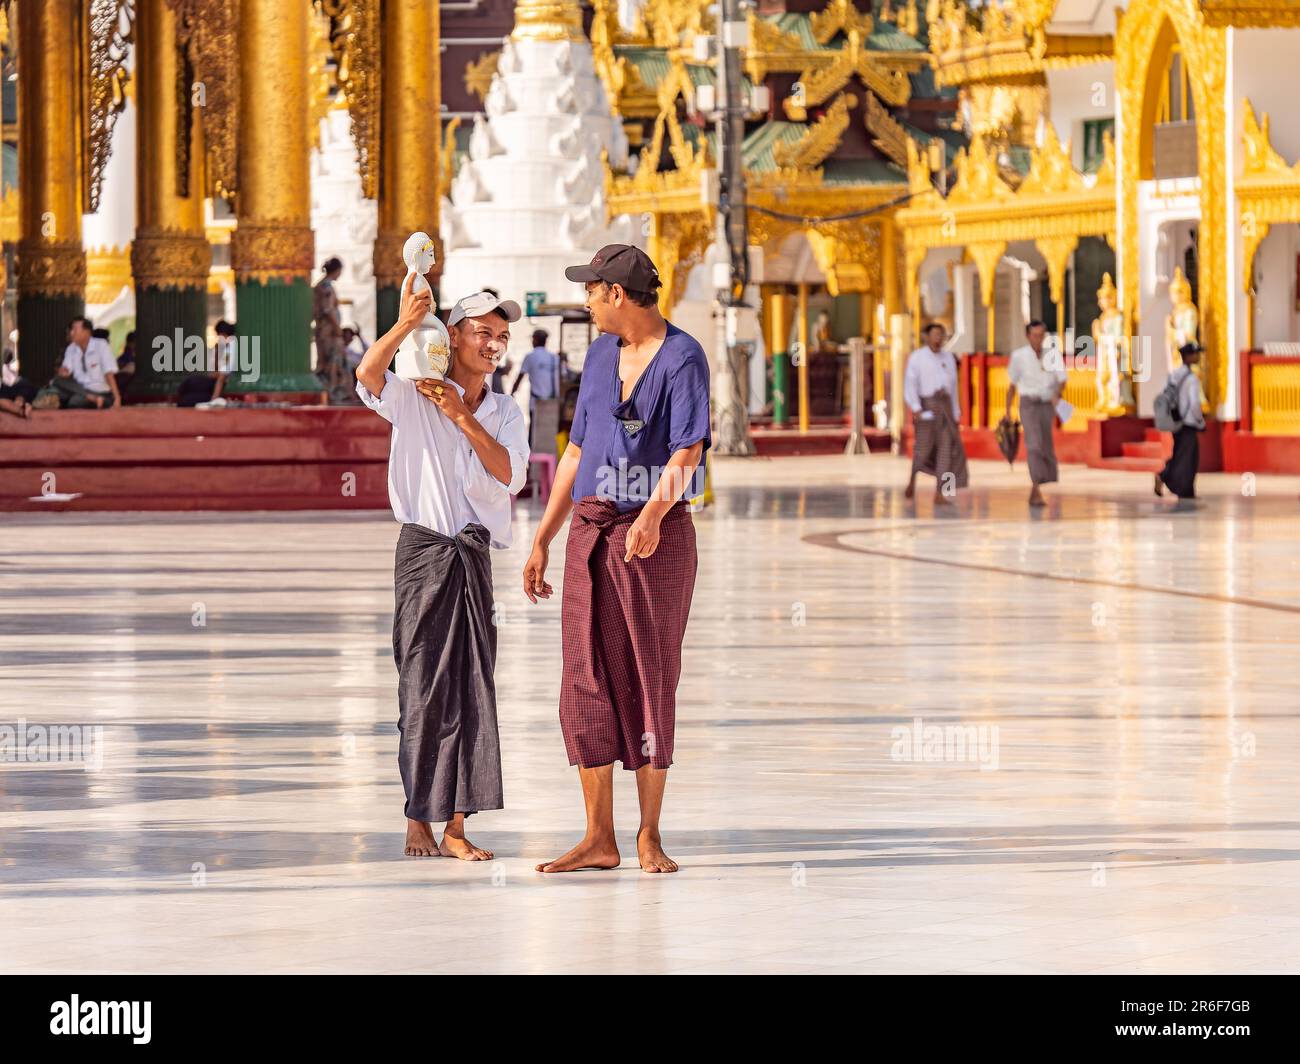 Two men talking, one carrying a Buddha image on his shoulder, at the Shwedagon Pagoda in Yangon, Myanmar. Stock Photo